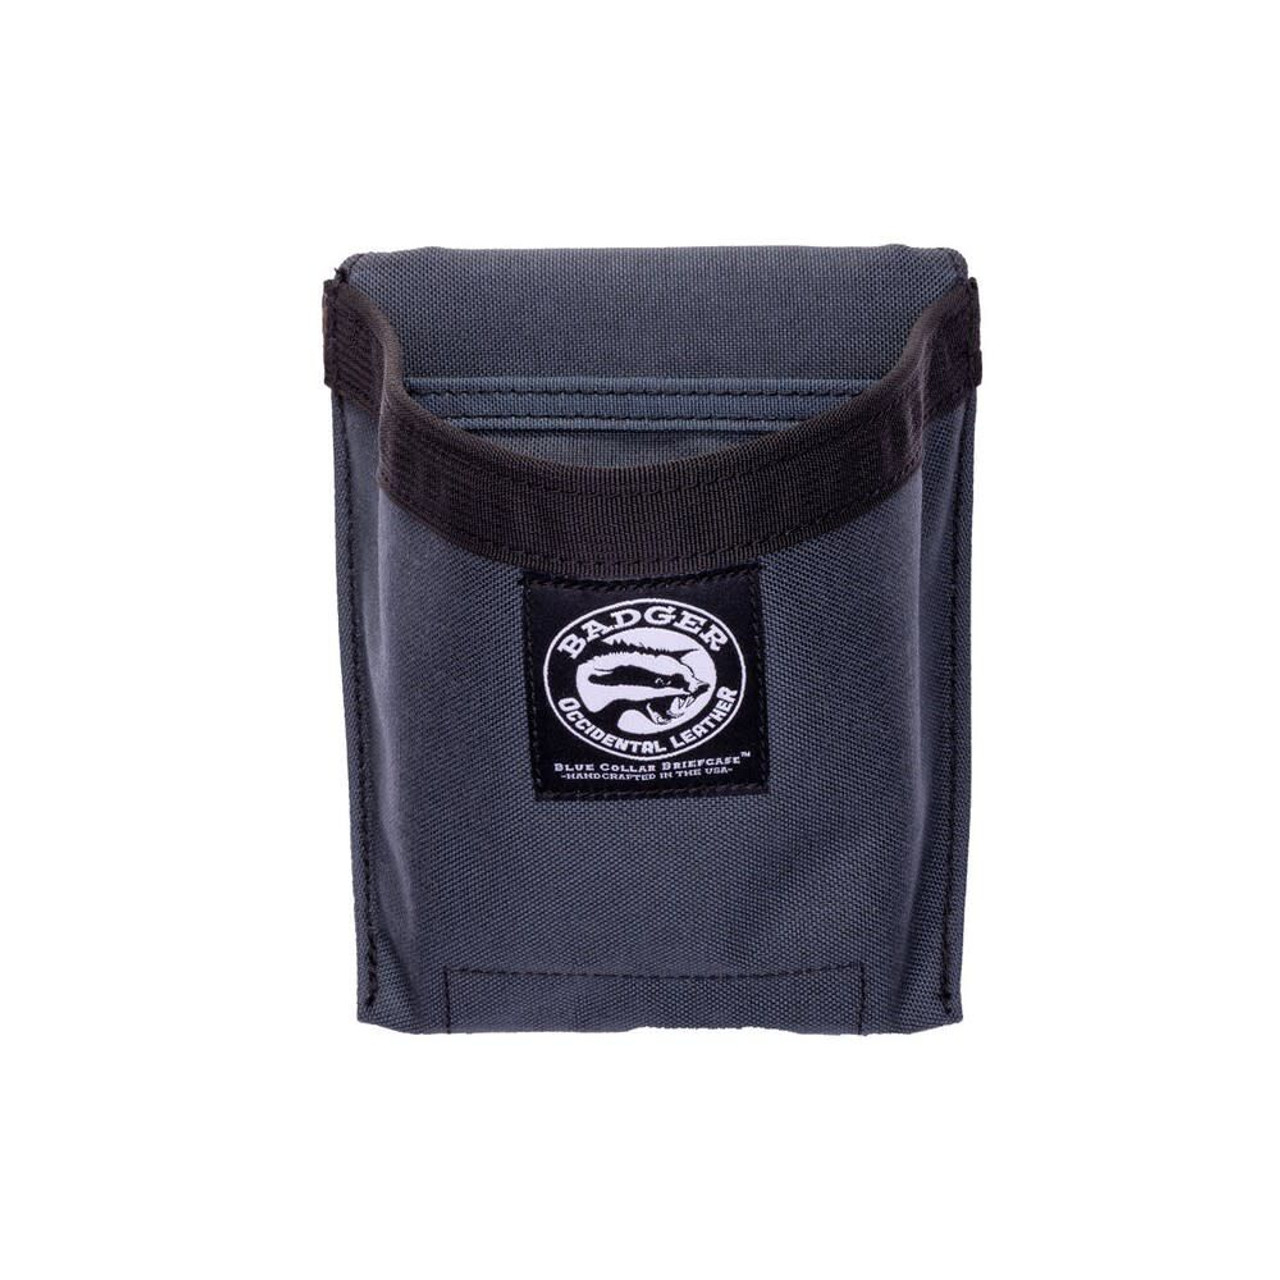 Badger Tool Belts BADGER-453010 Accessory Pouch Gunmetal Gray  Atlas-Machinery